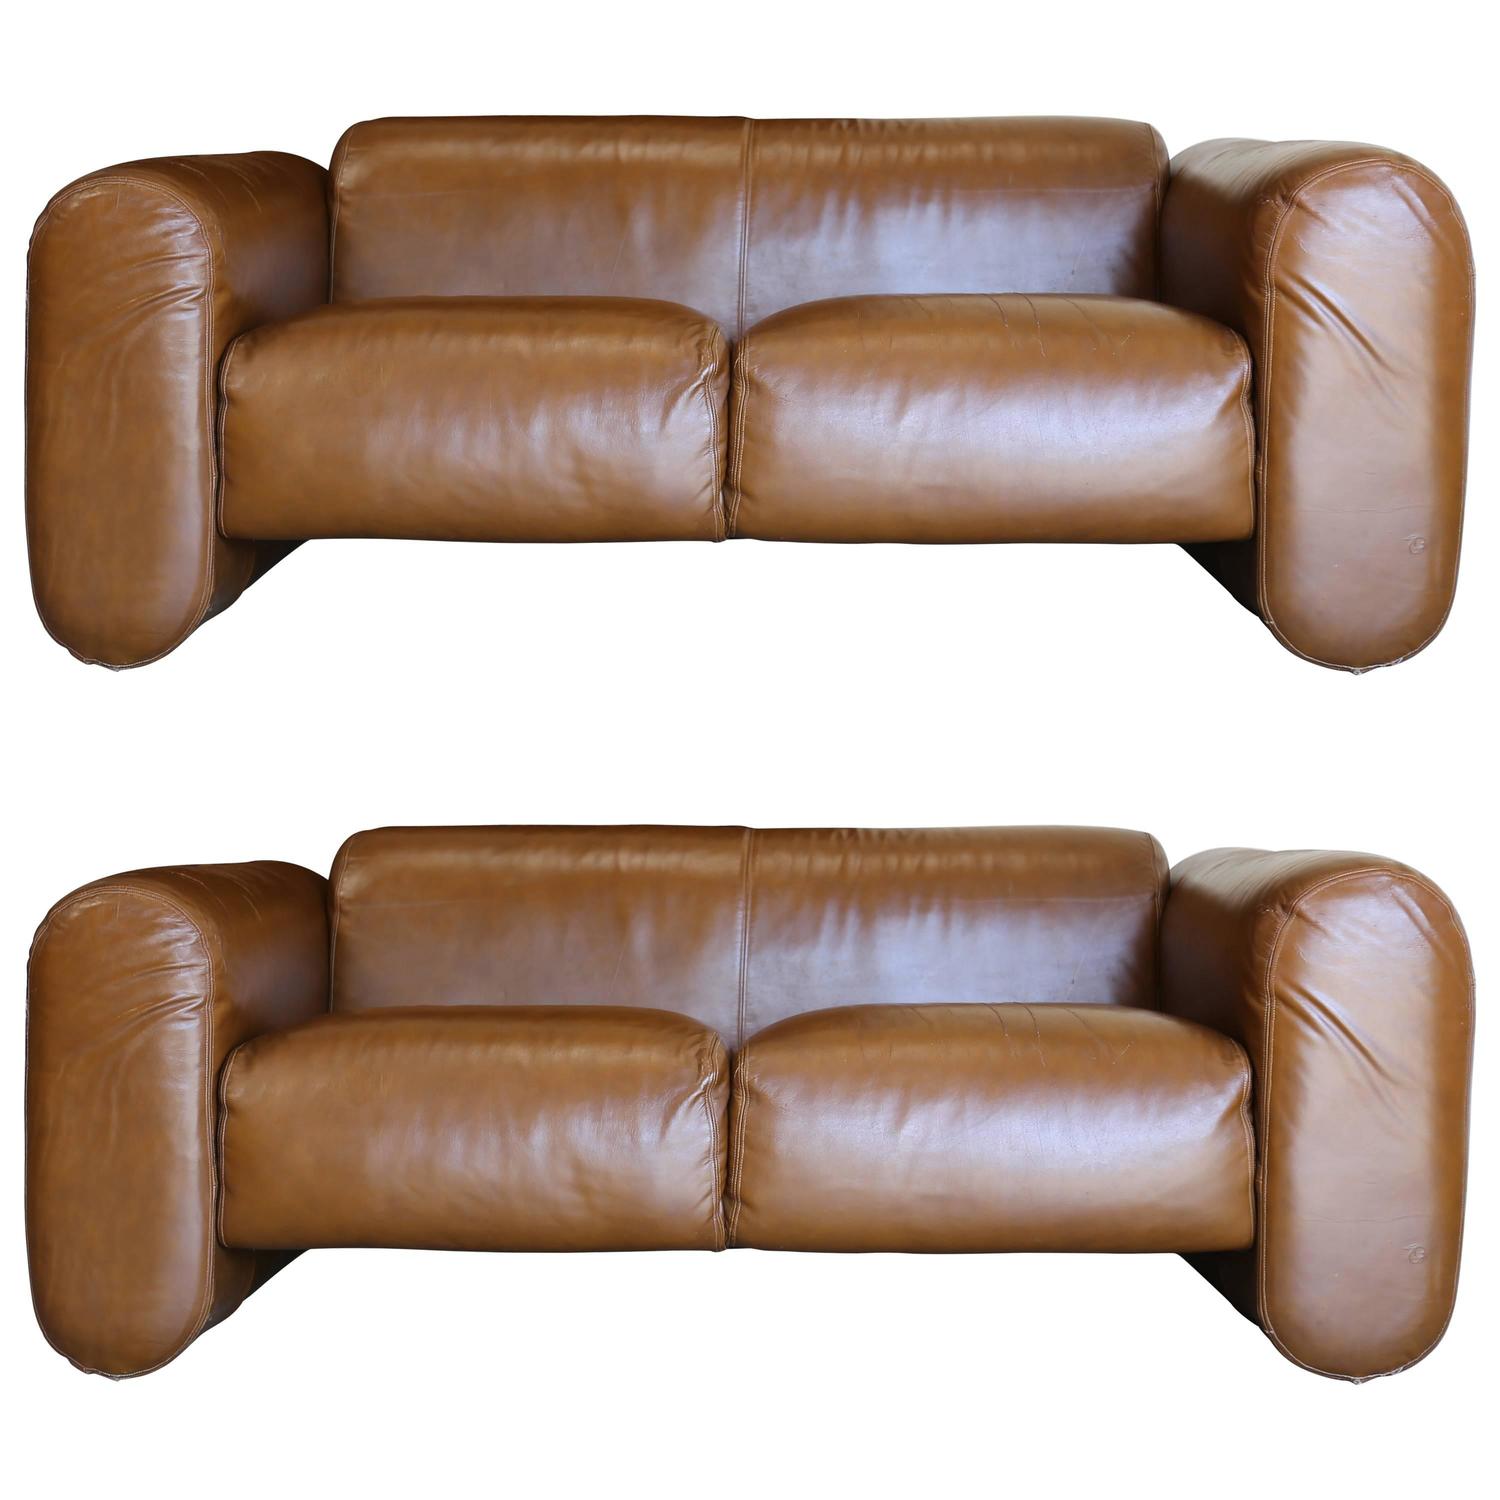 Pair of Leather Sofas by Stendig at 1stdibs